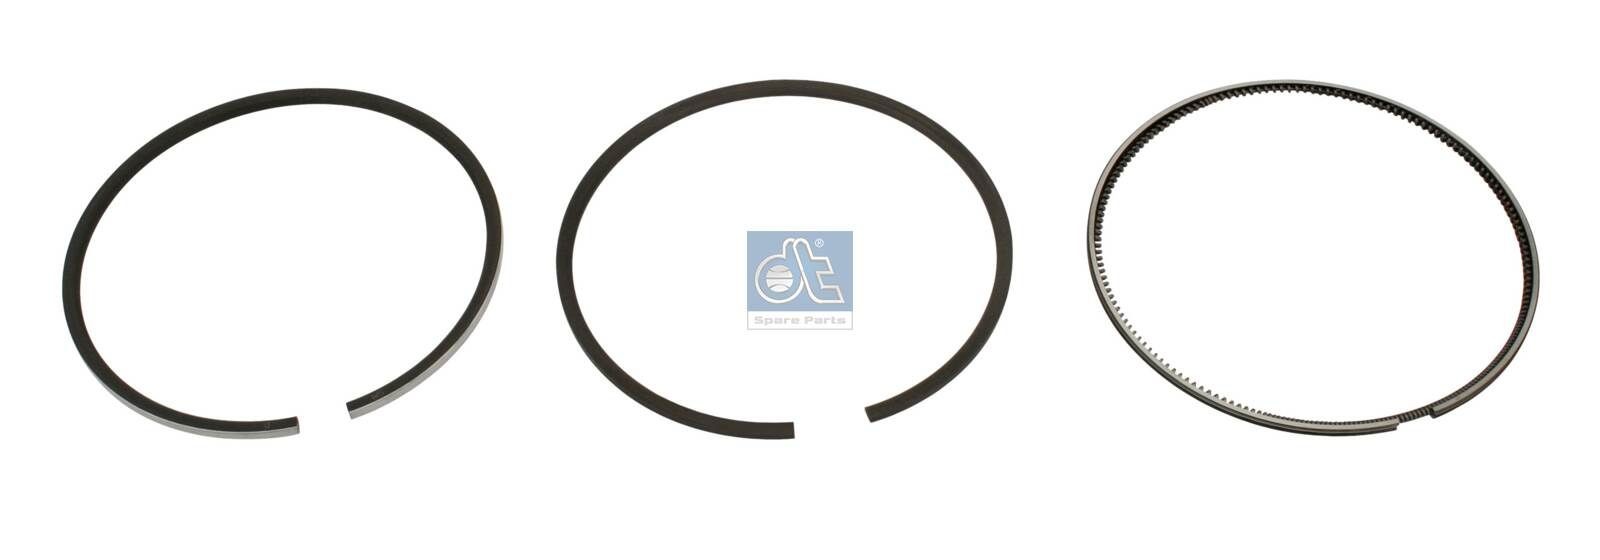 038 43 N0 DT Spare Parts 2.90097 Piston Ring Kit 276870